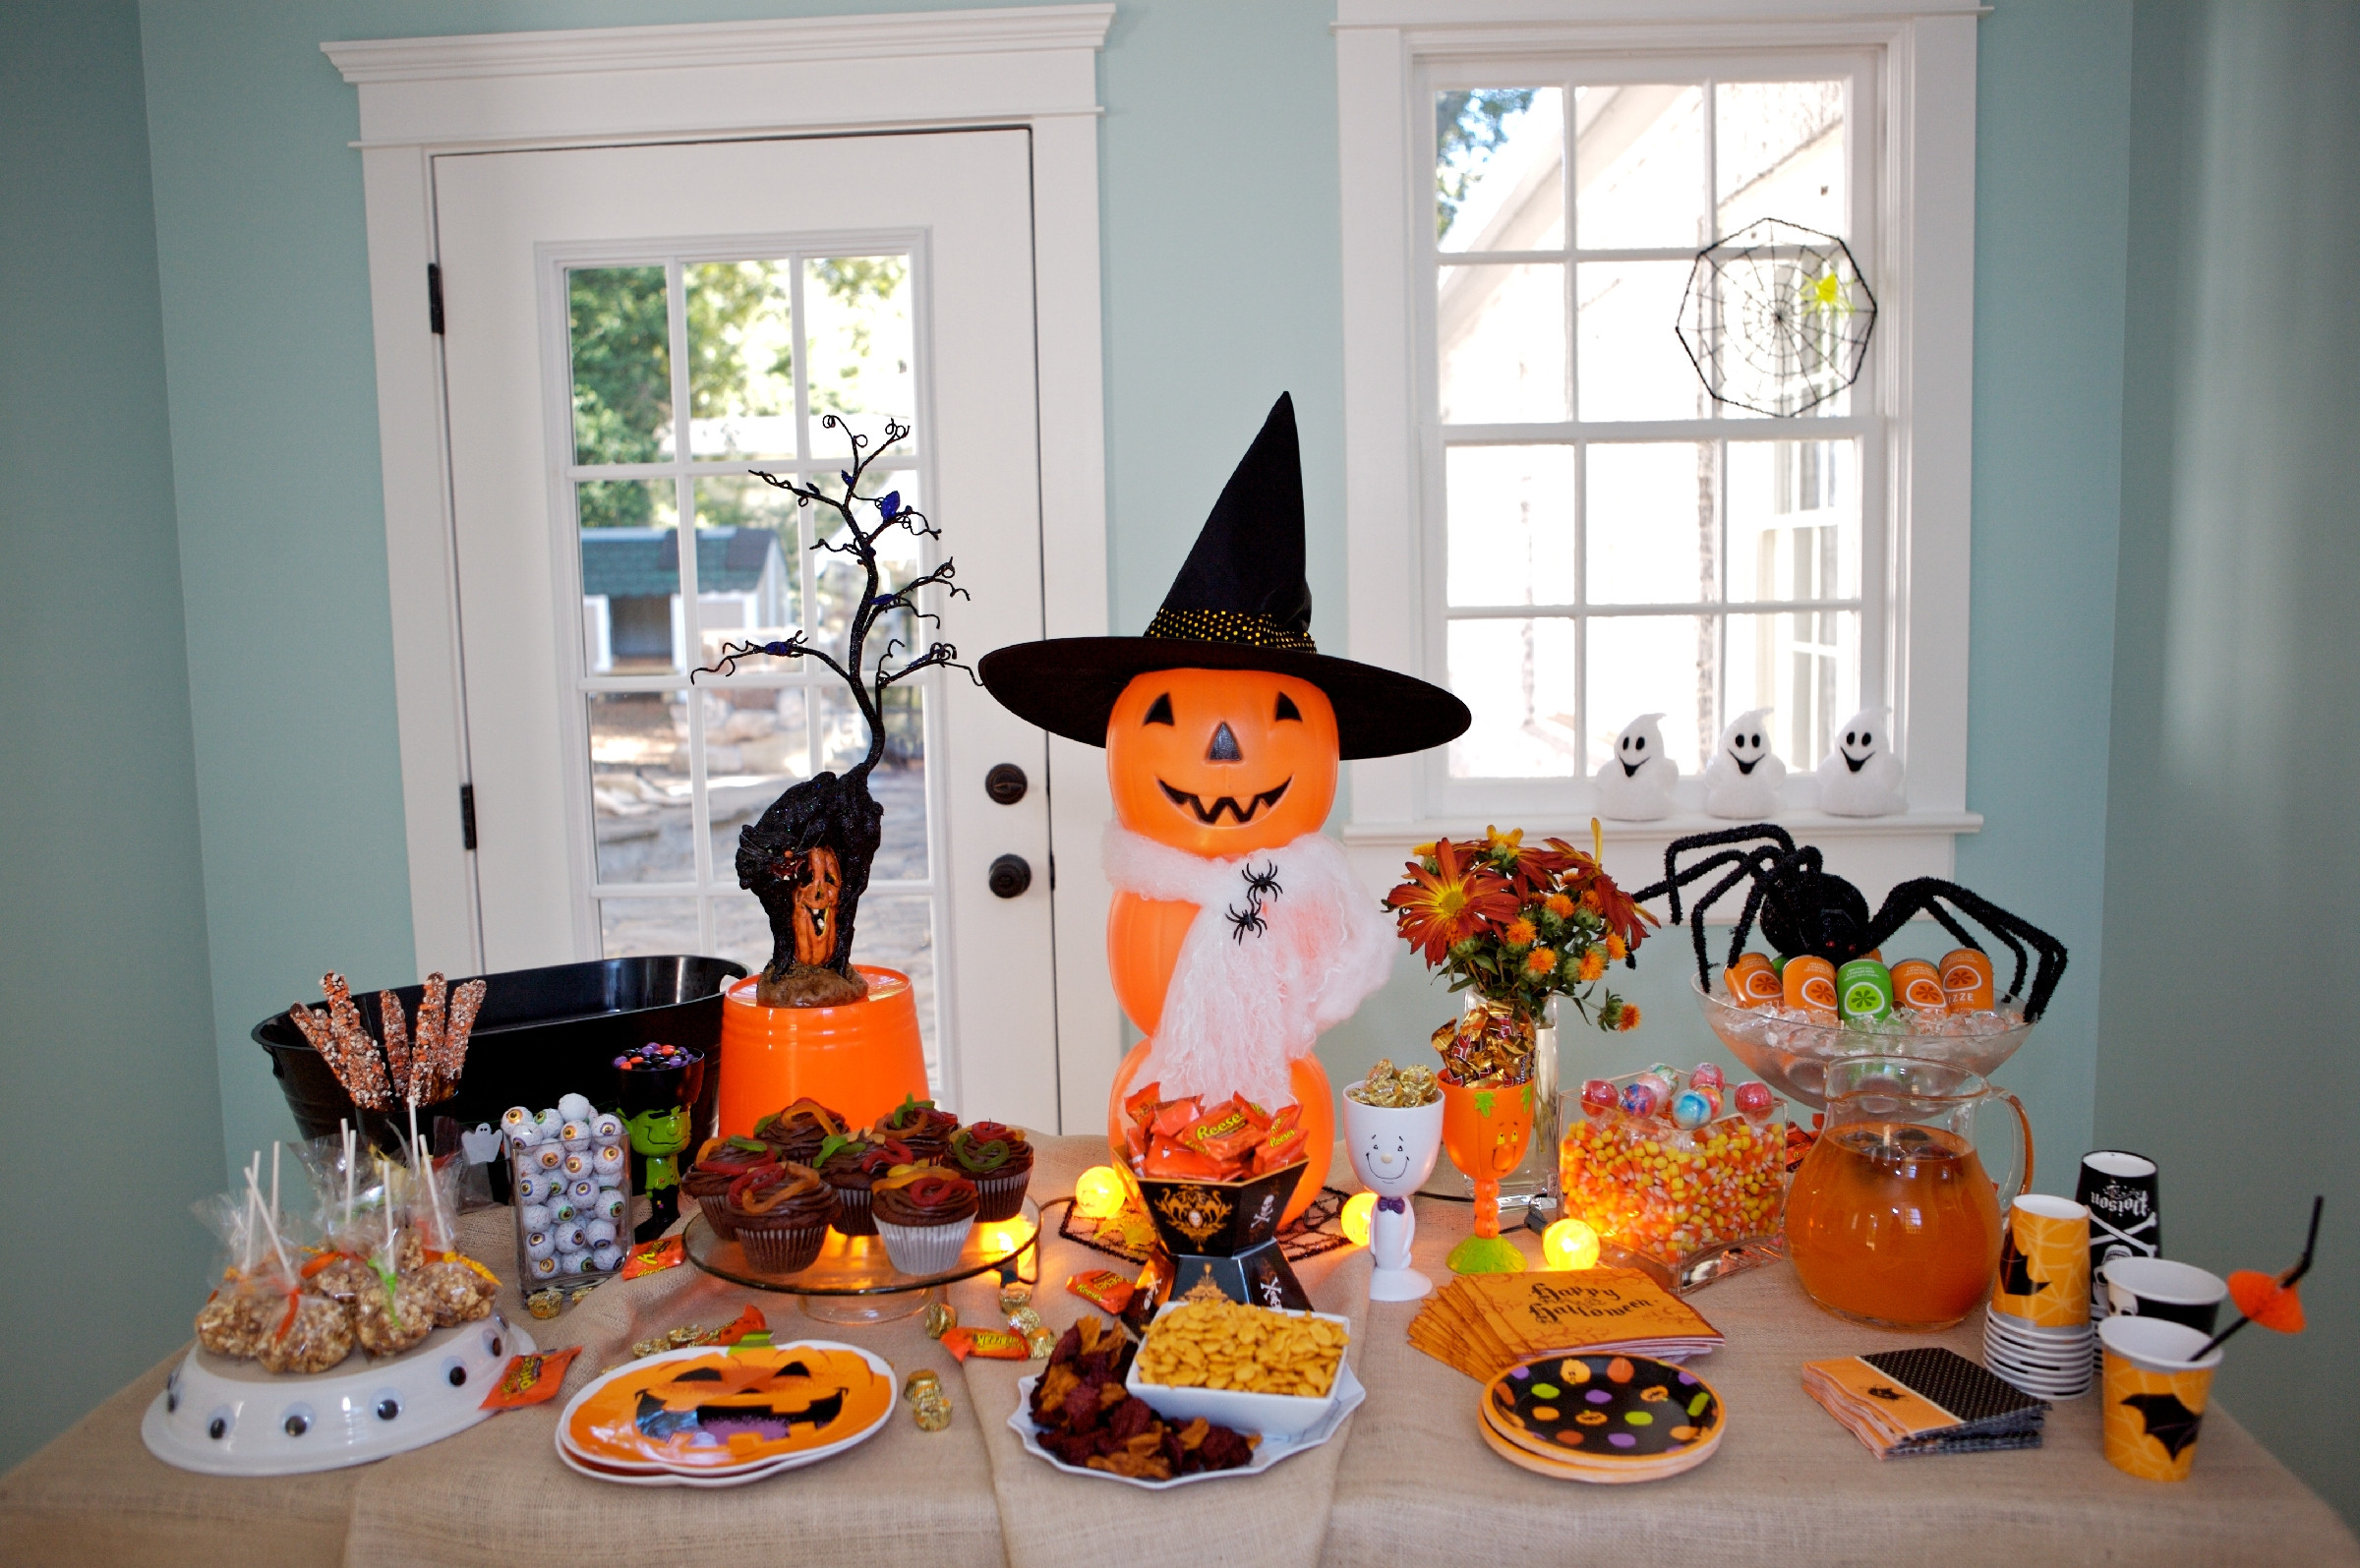 Halloween Party Decorations Ideas
 Martie Knows Parties BLOG Martie s Halloween Party